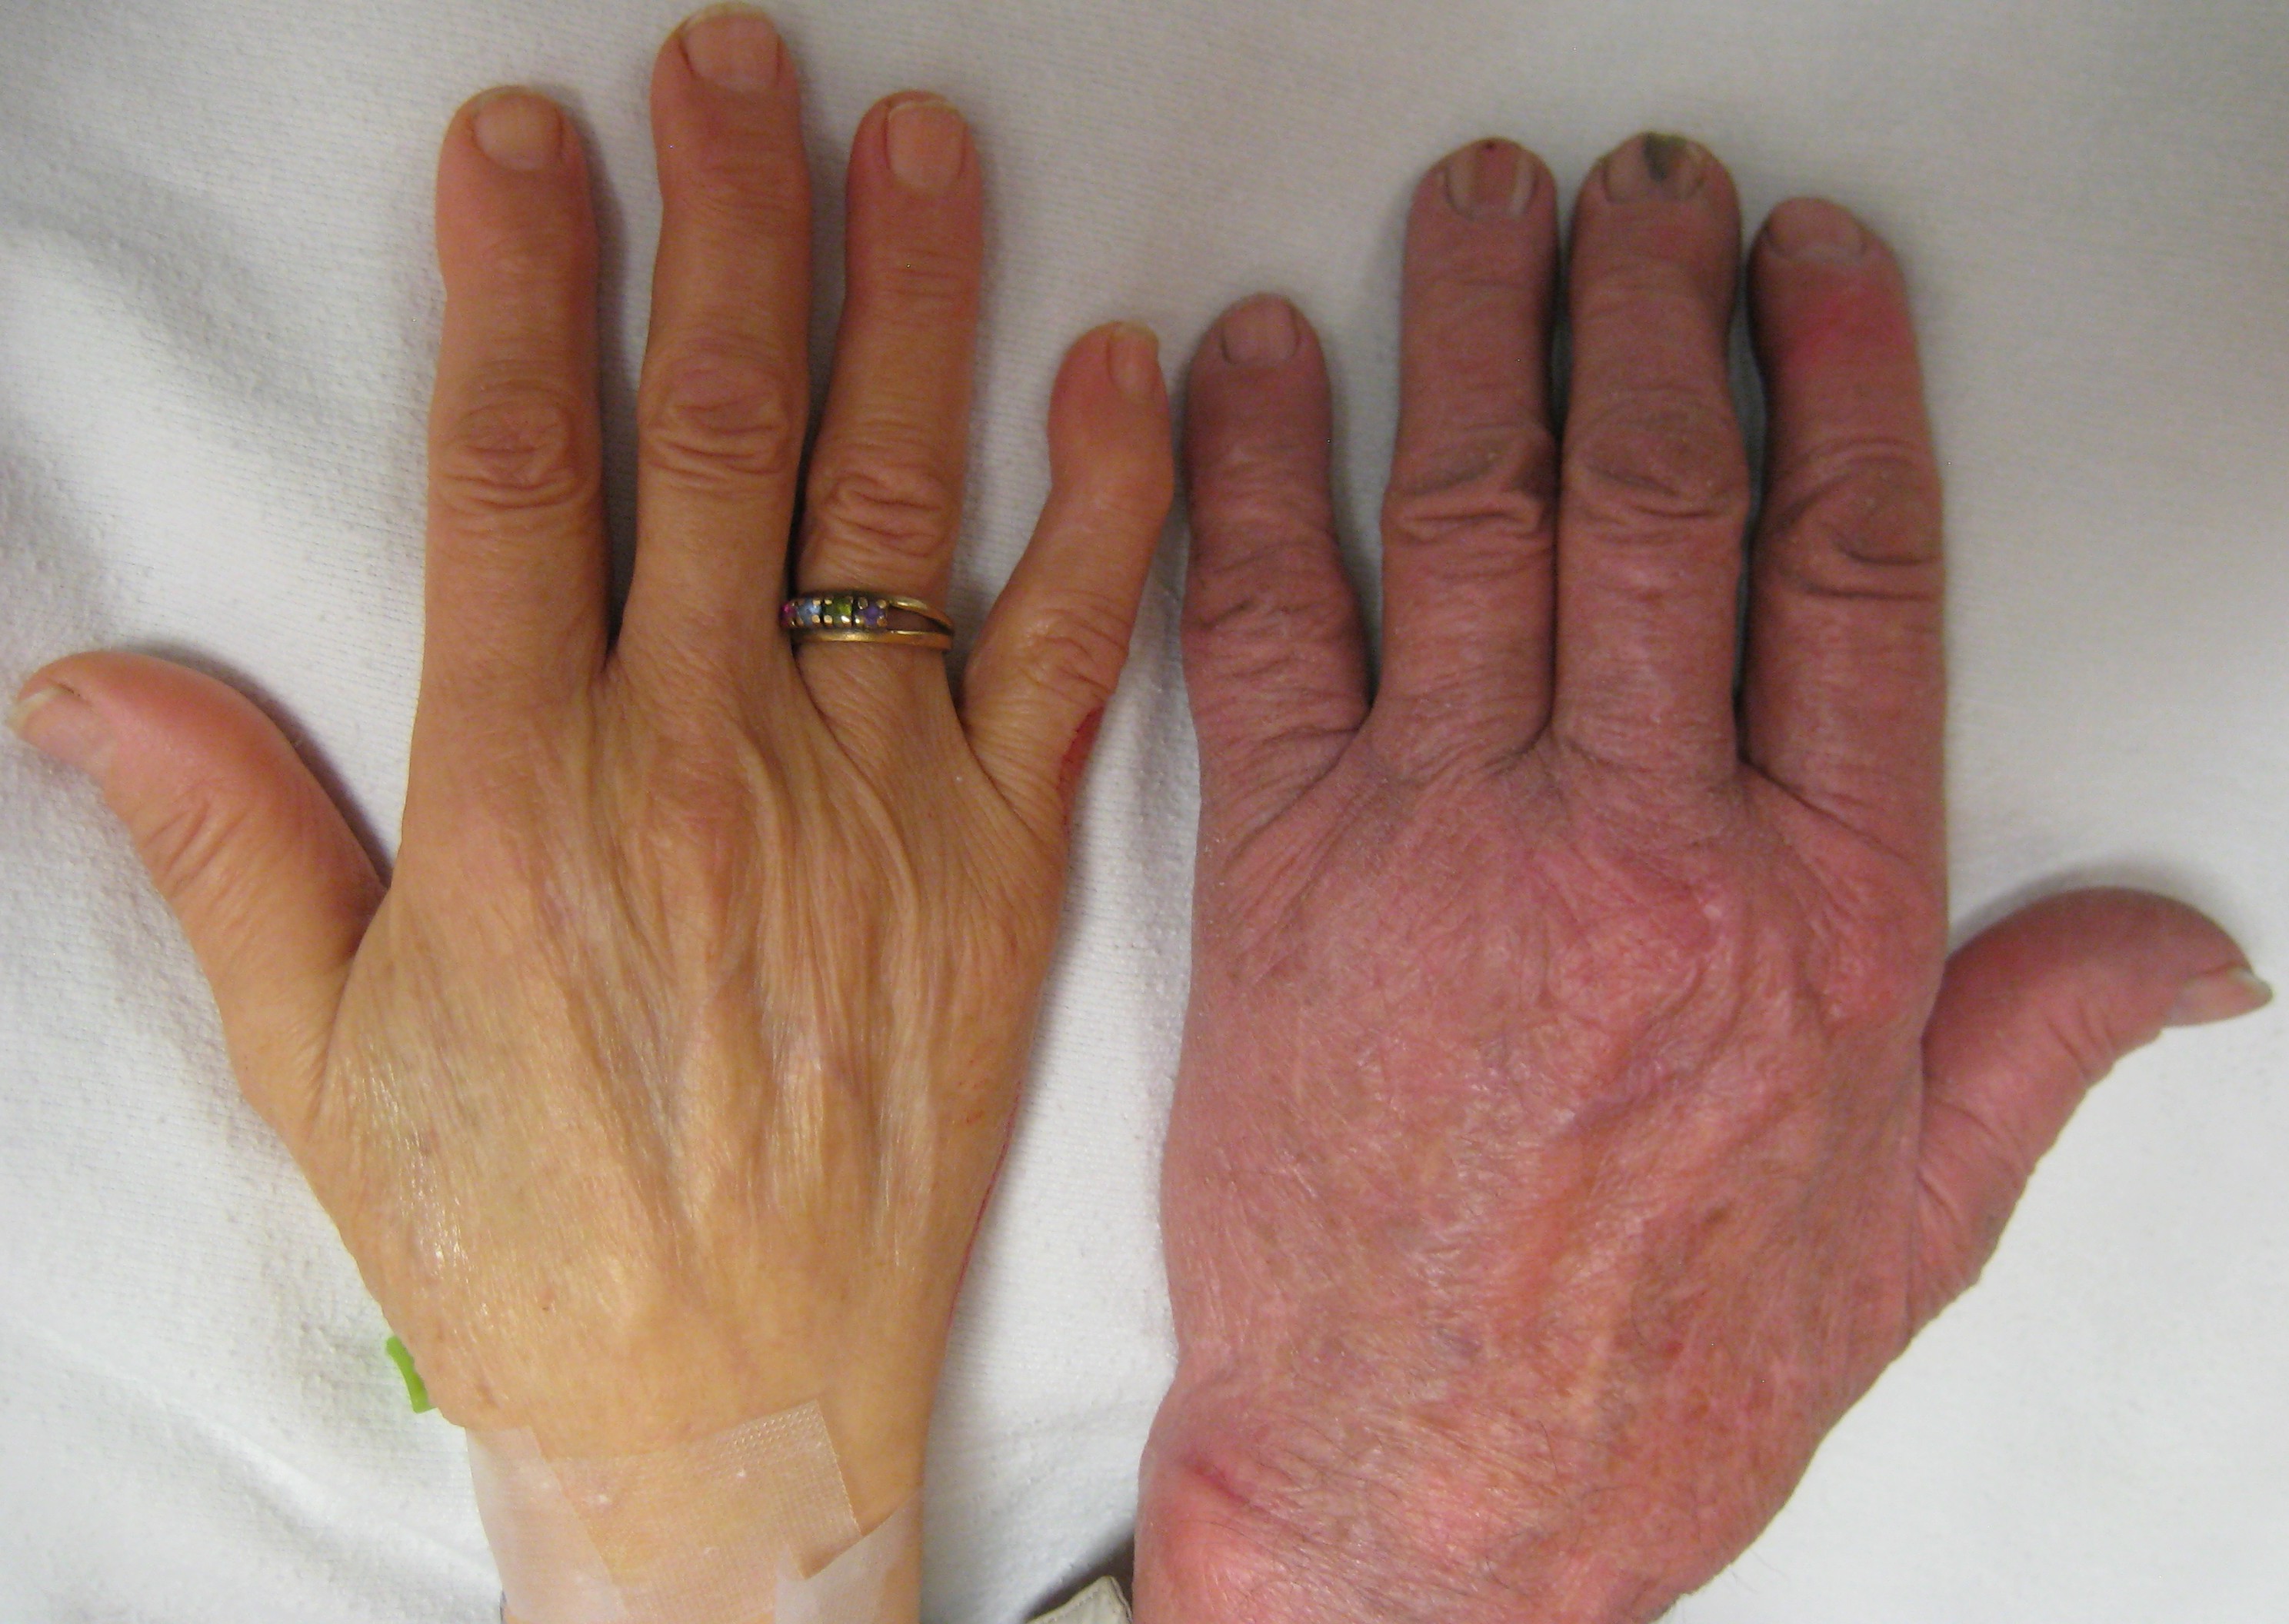 The hand of a person with severe anemia (on the left) compared to one without (on the right) Source -James Heilman, MD - Own work[4]